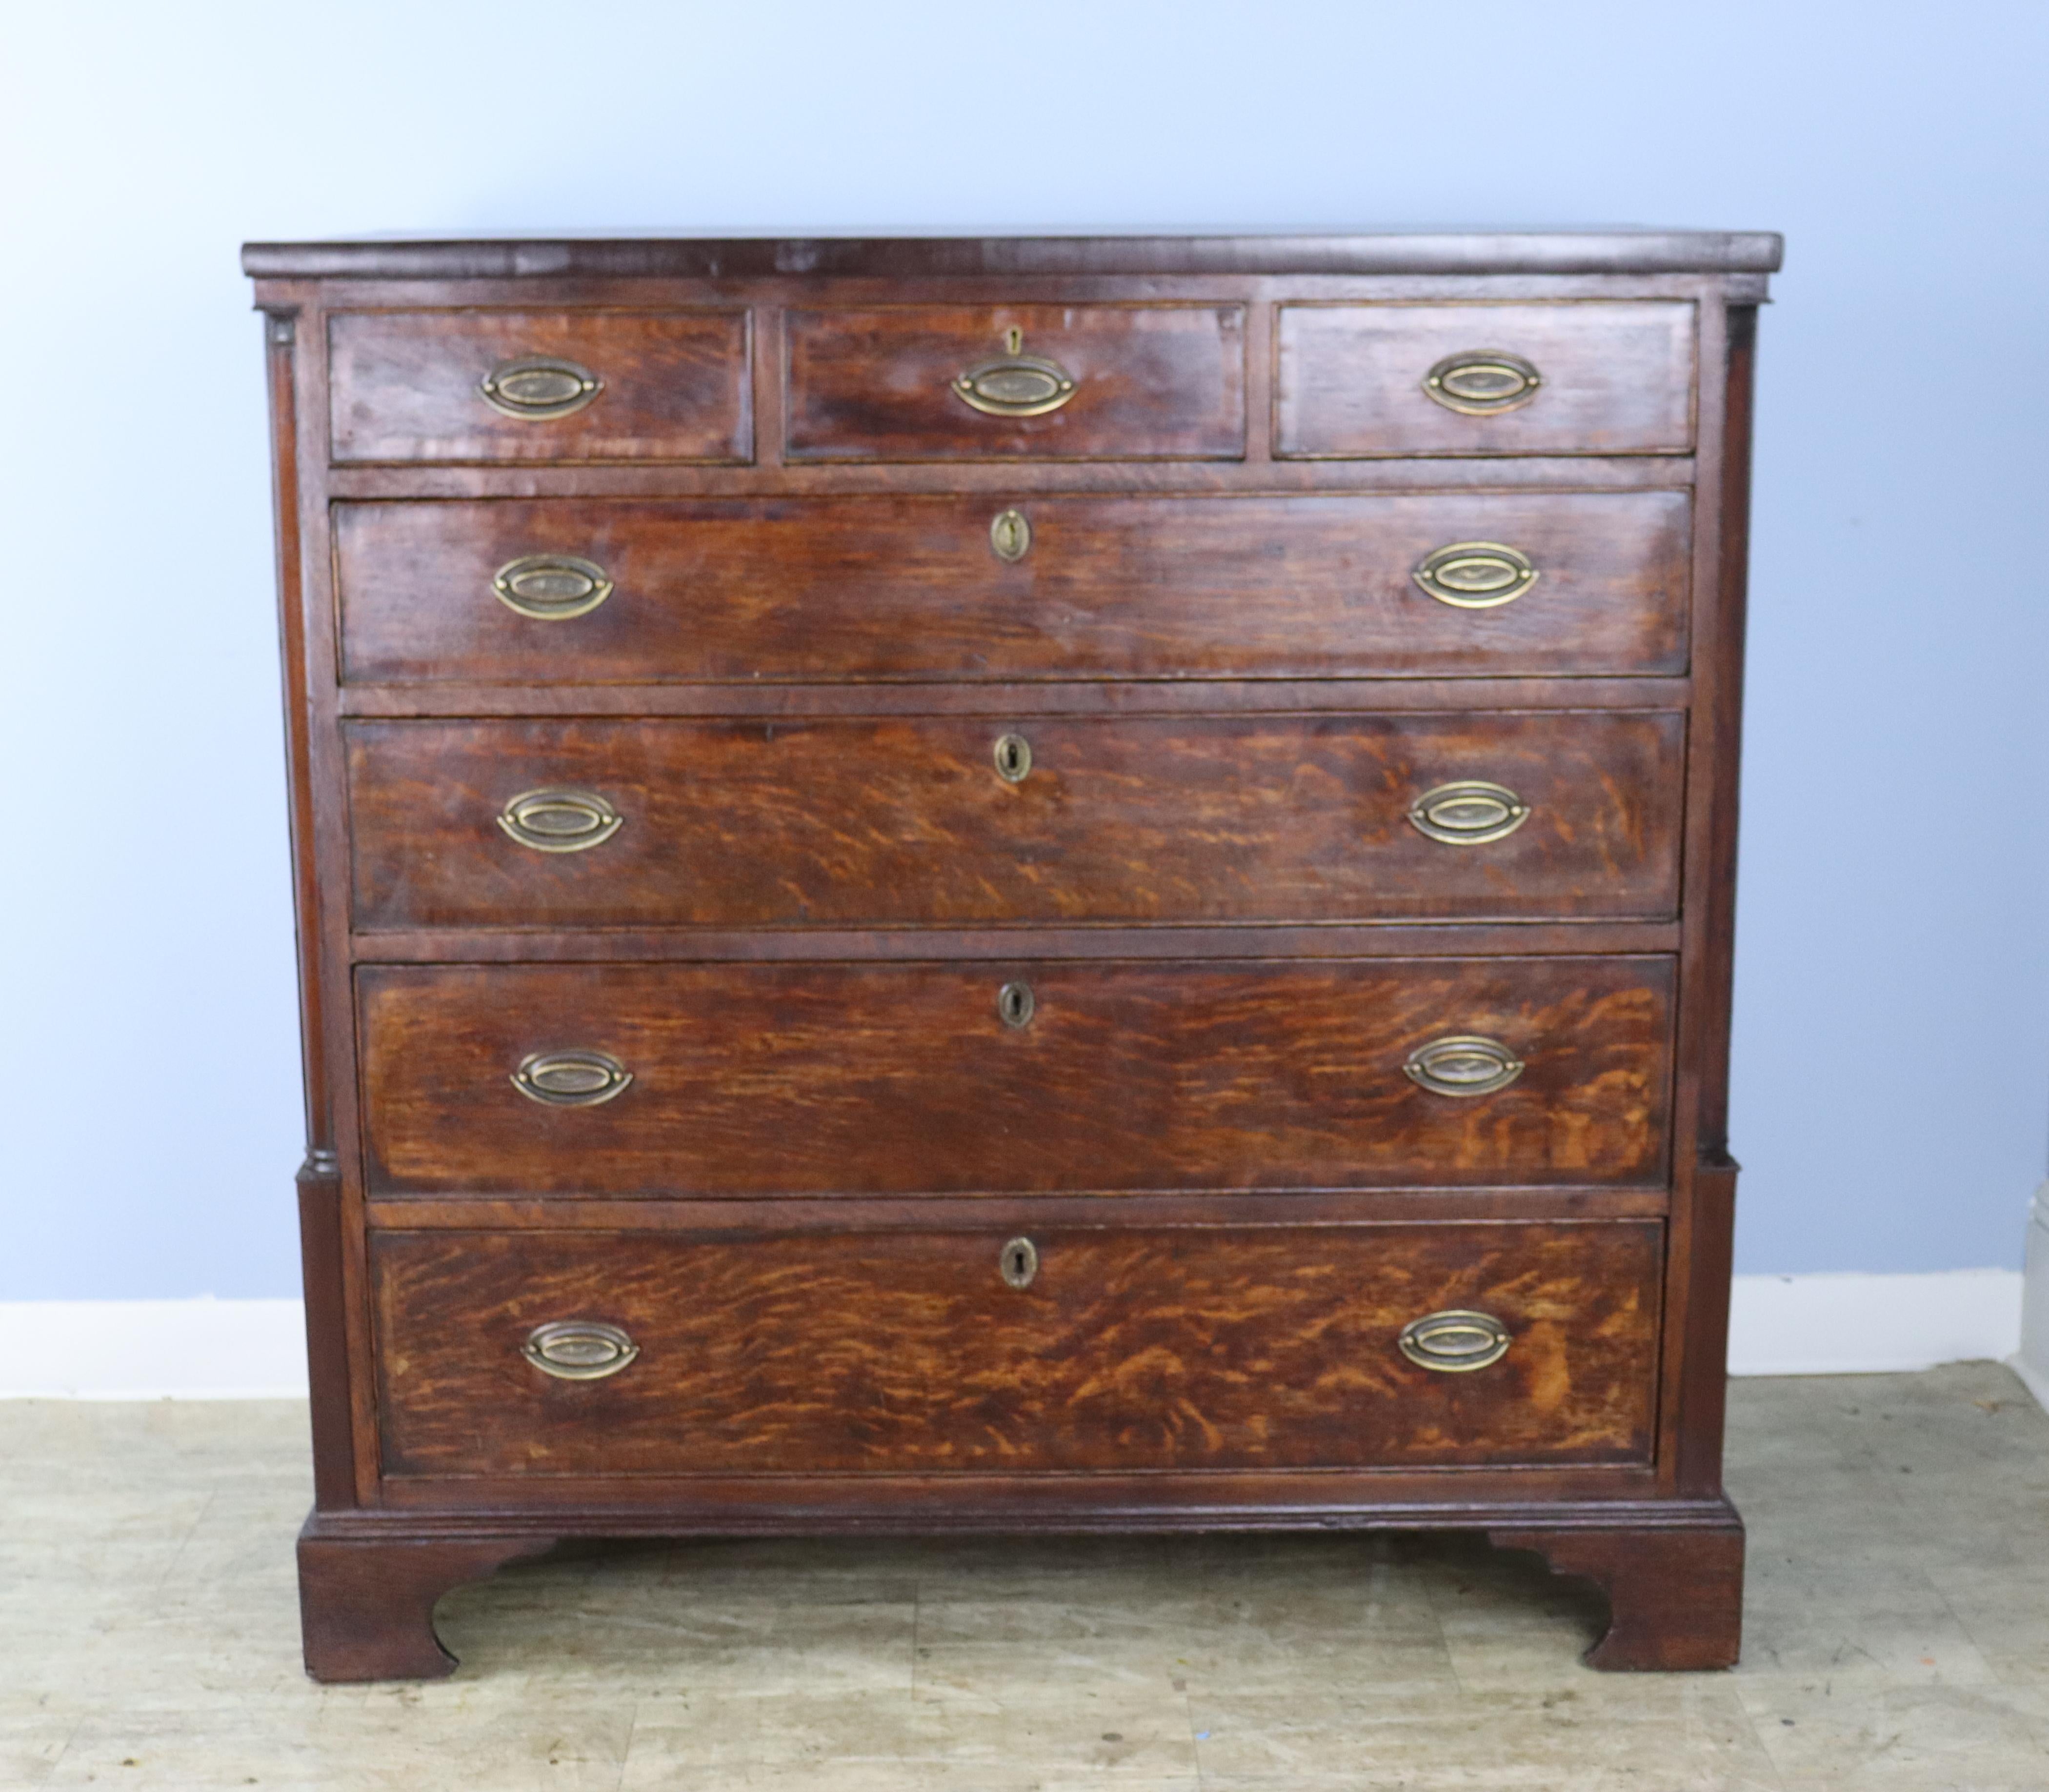 A handsome period Welsh oak 3/4 chest of drawers. The vivid oak grain and intact cockbeading around the drawers make this chest so appealing. Four roomy drawers under three smaller drawers, so lots of good storage. Original ogee feet complete the